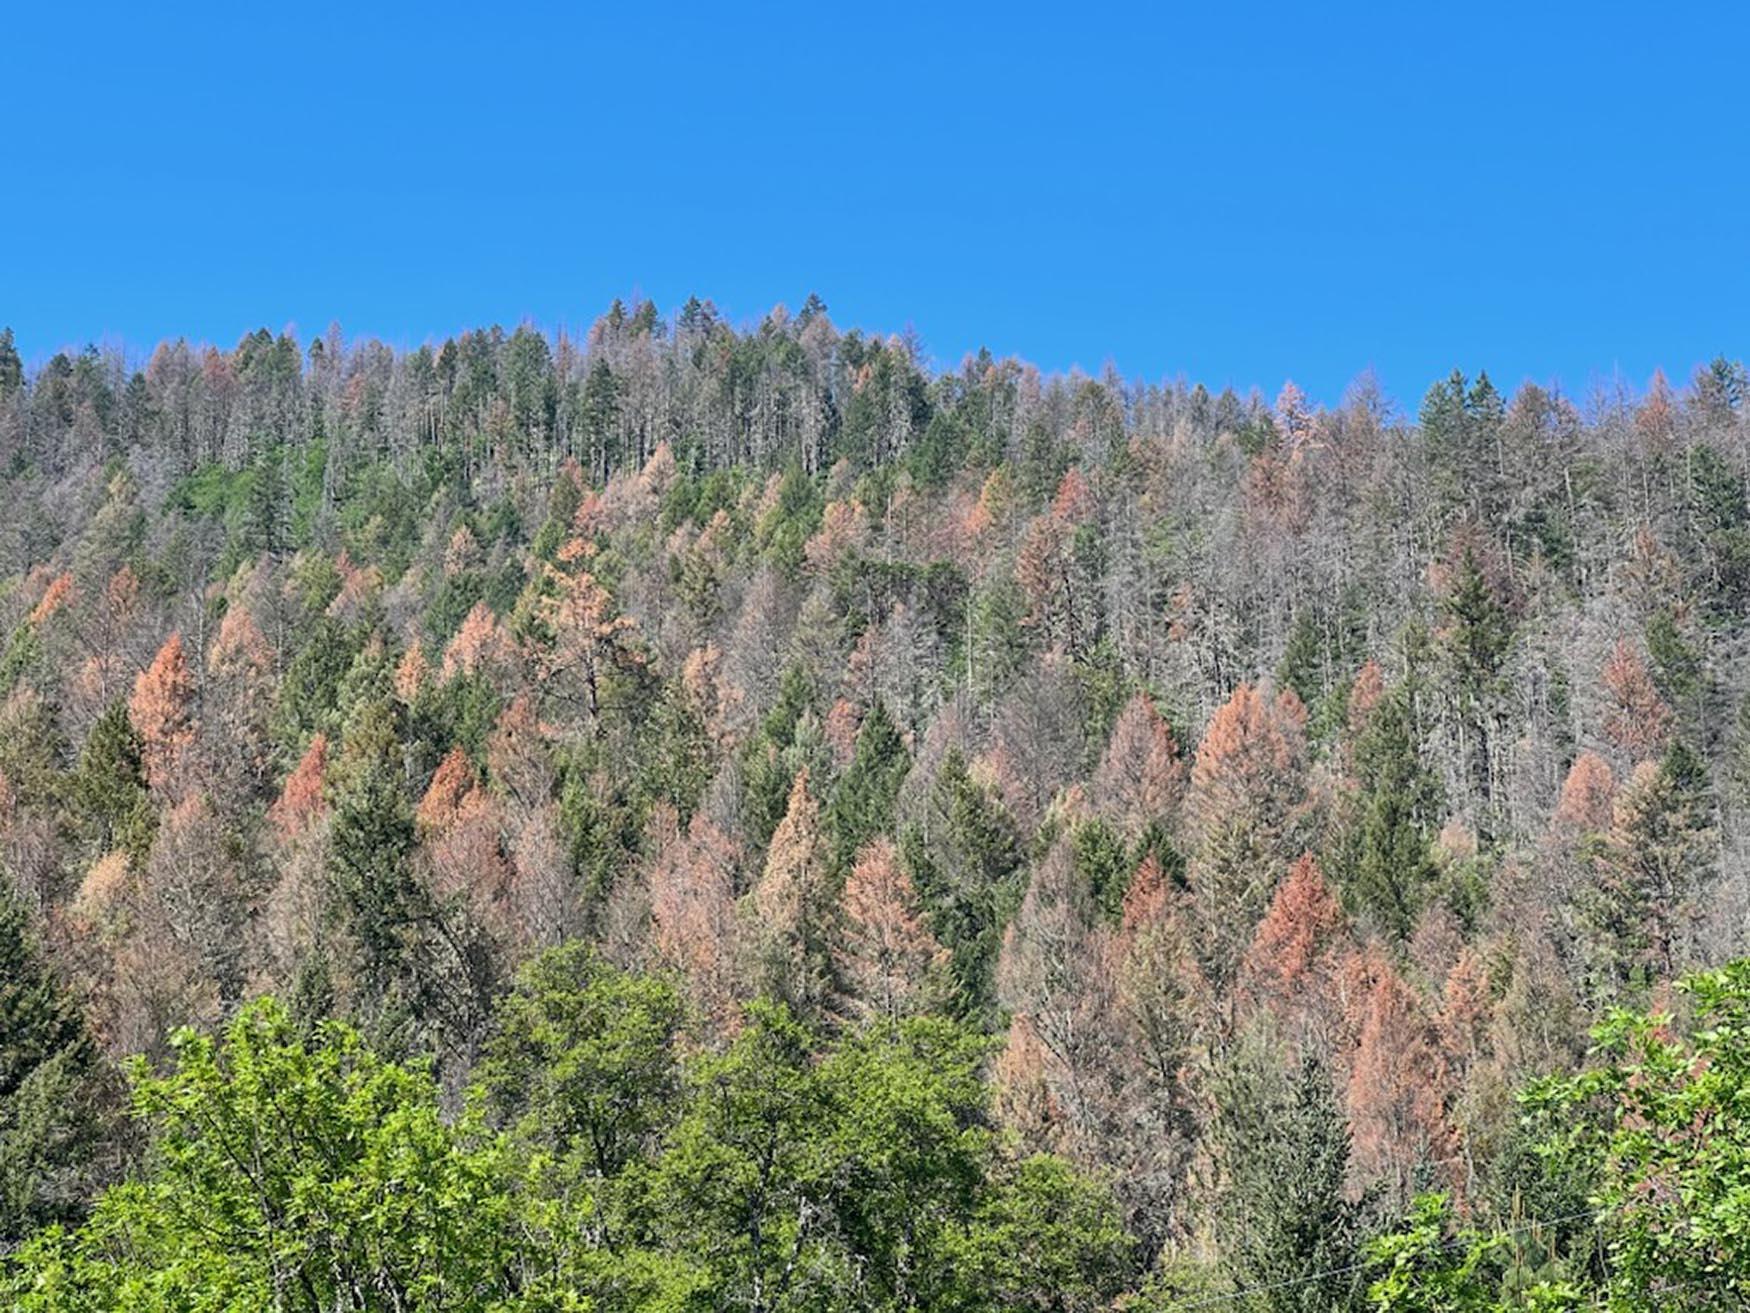 a hillside with a mix of brown dead and live trees, blue sky